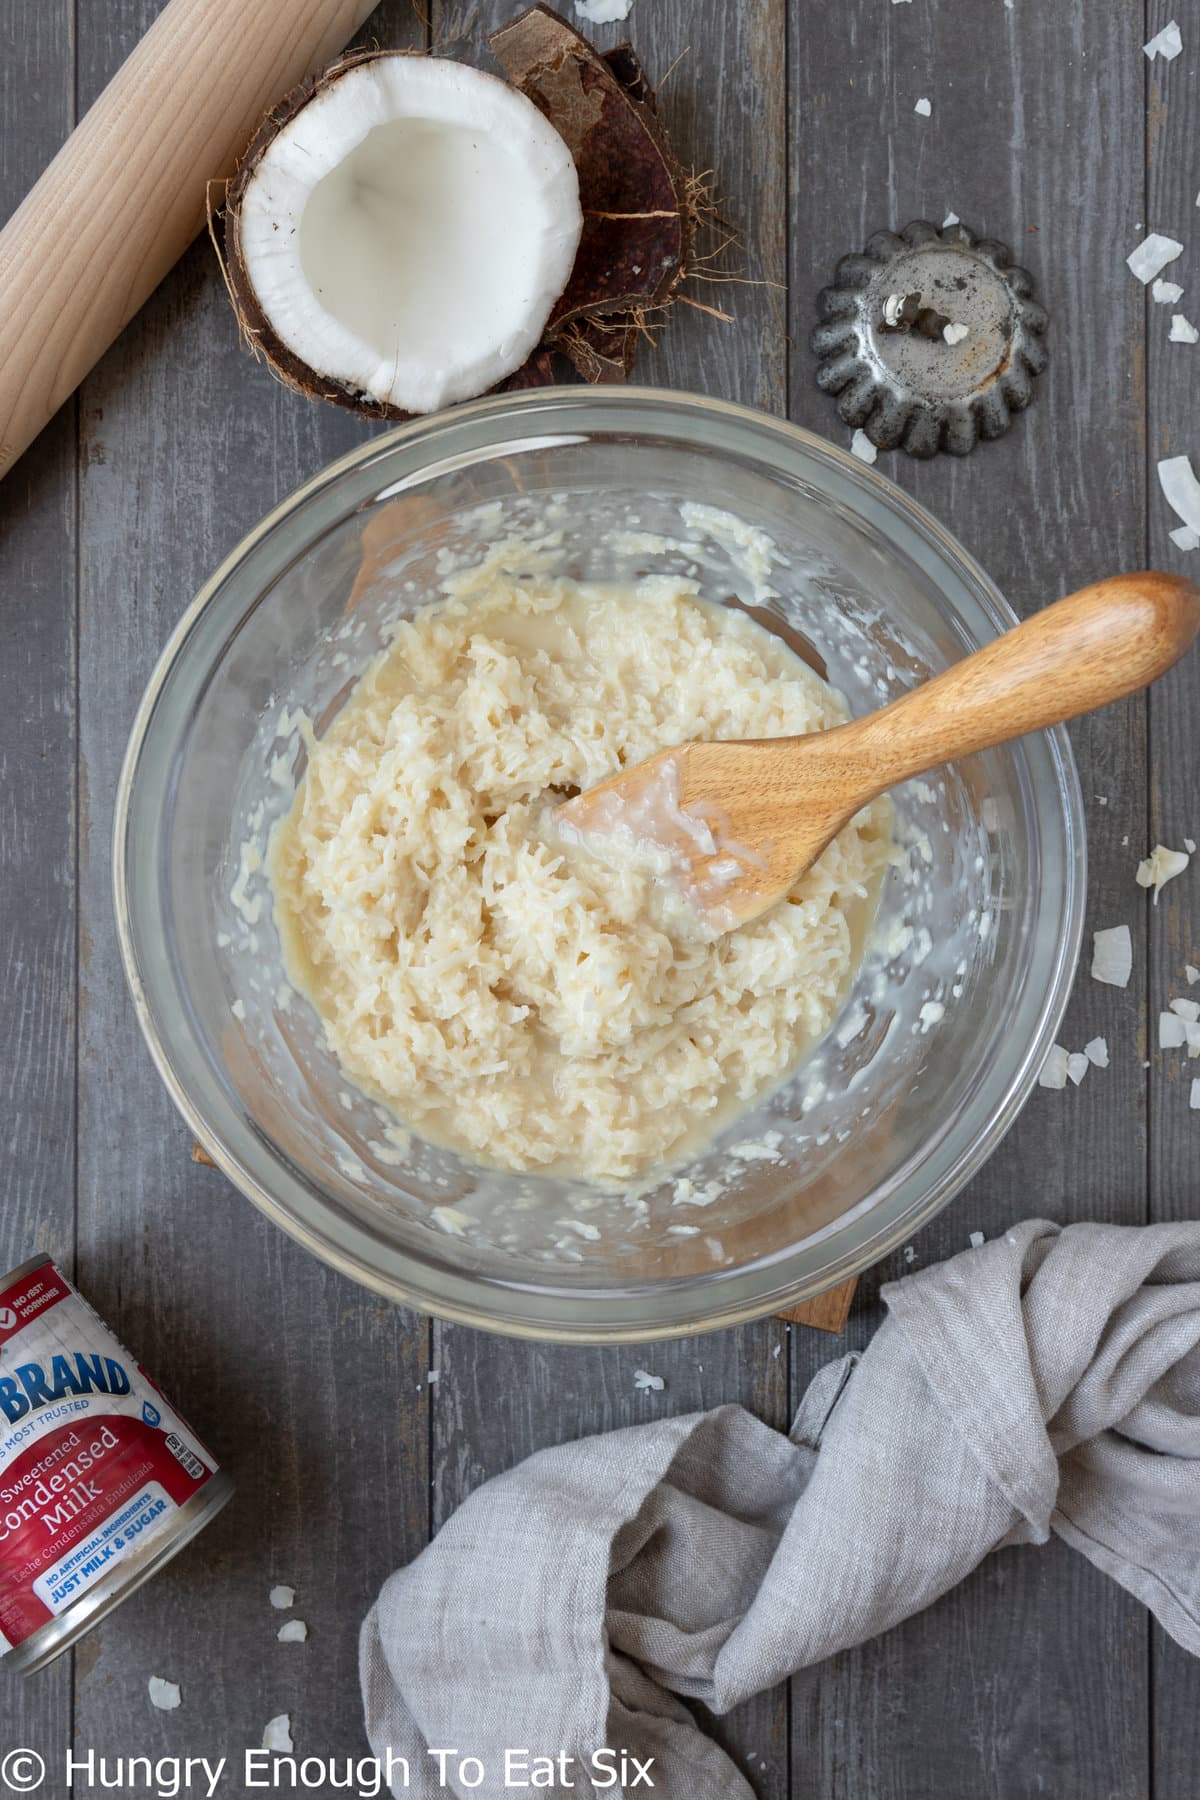 Bowl with creamy coconut mixture and wooden spoon.